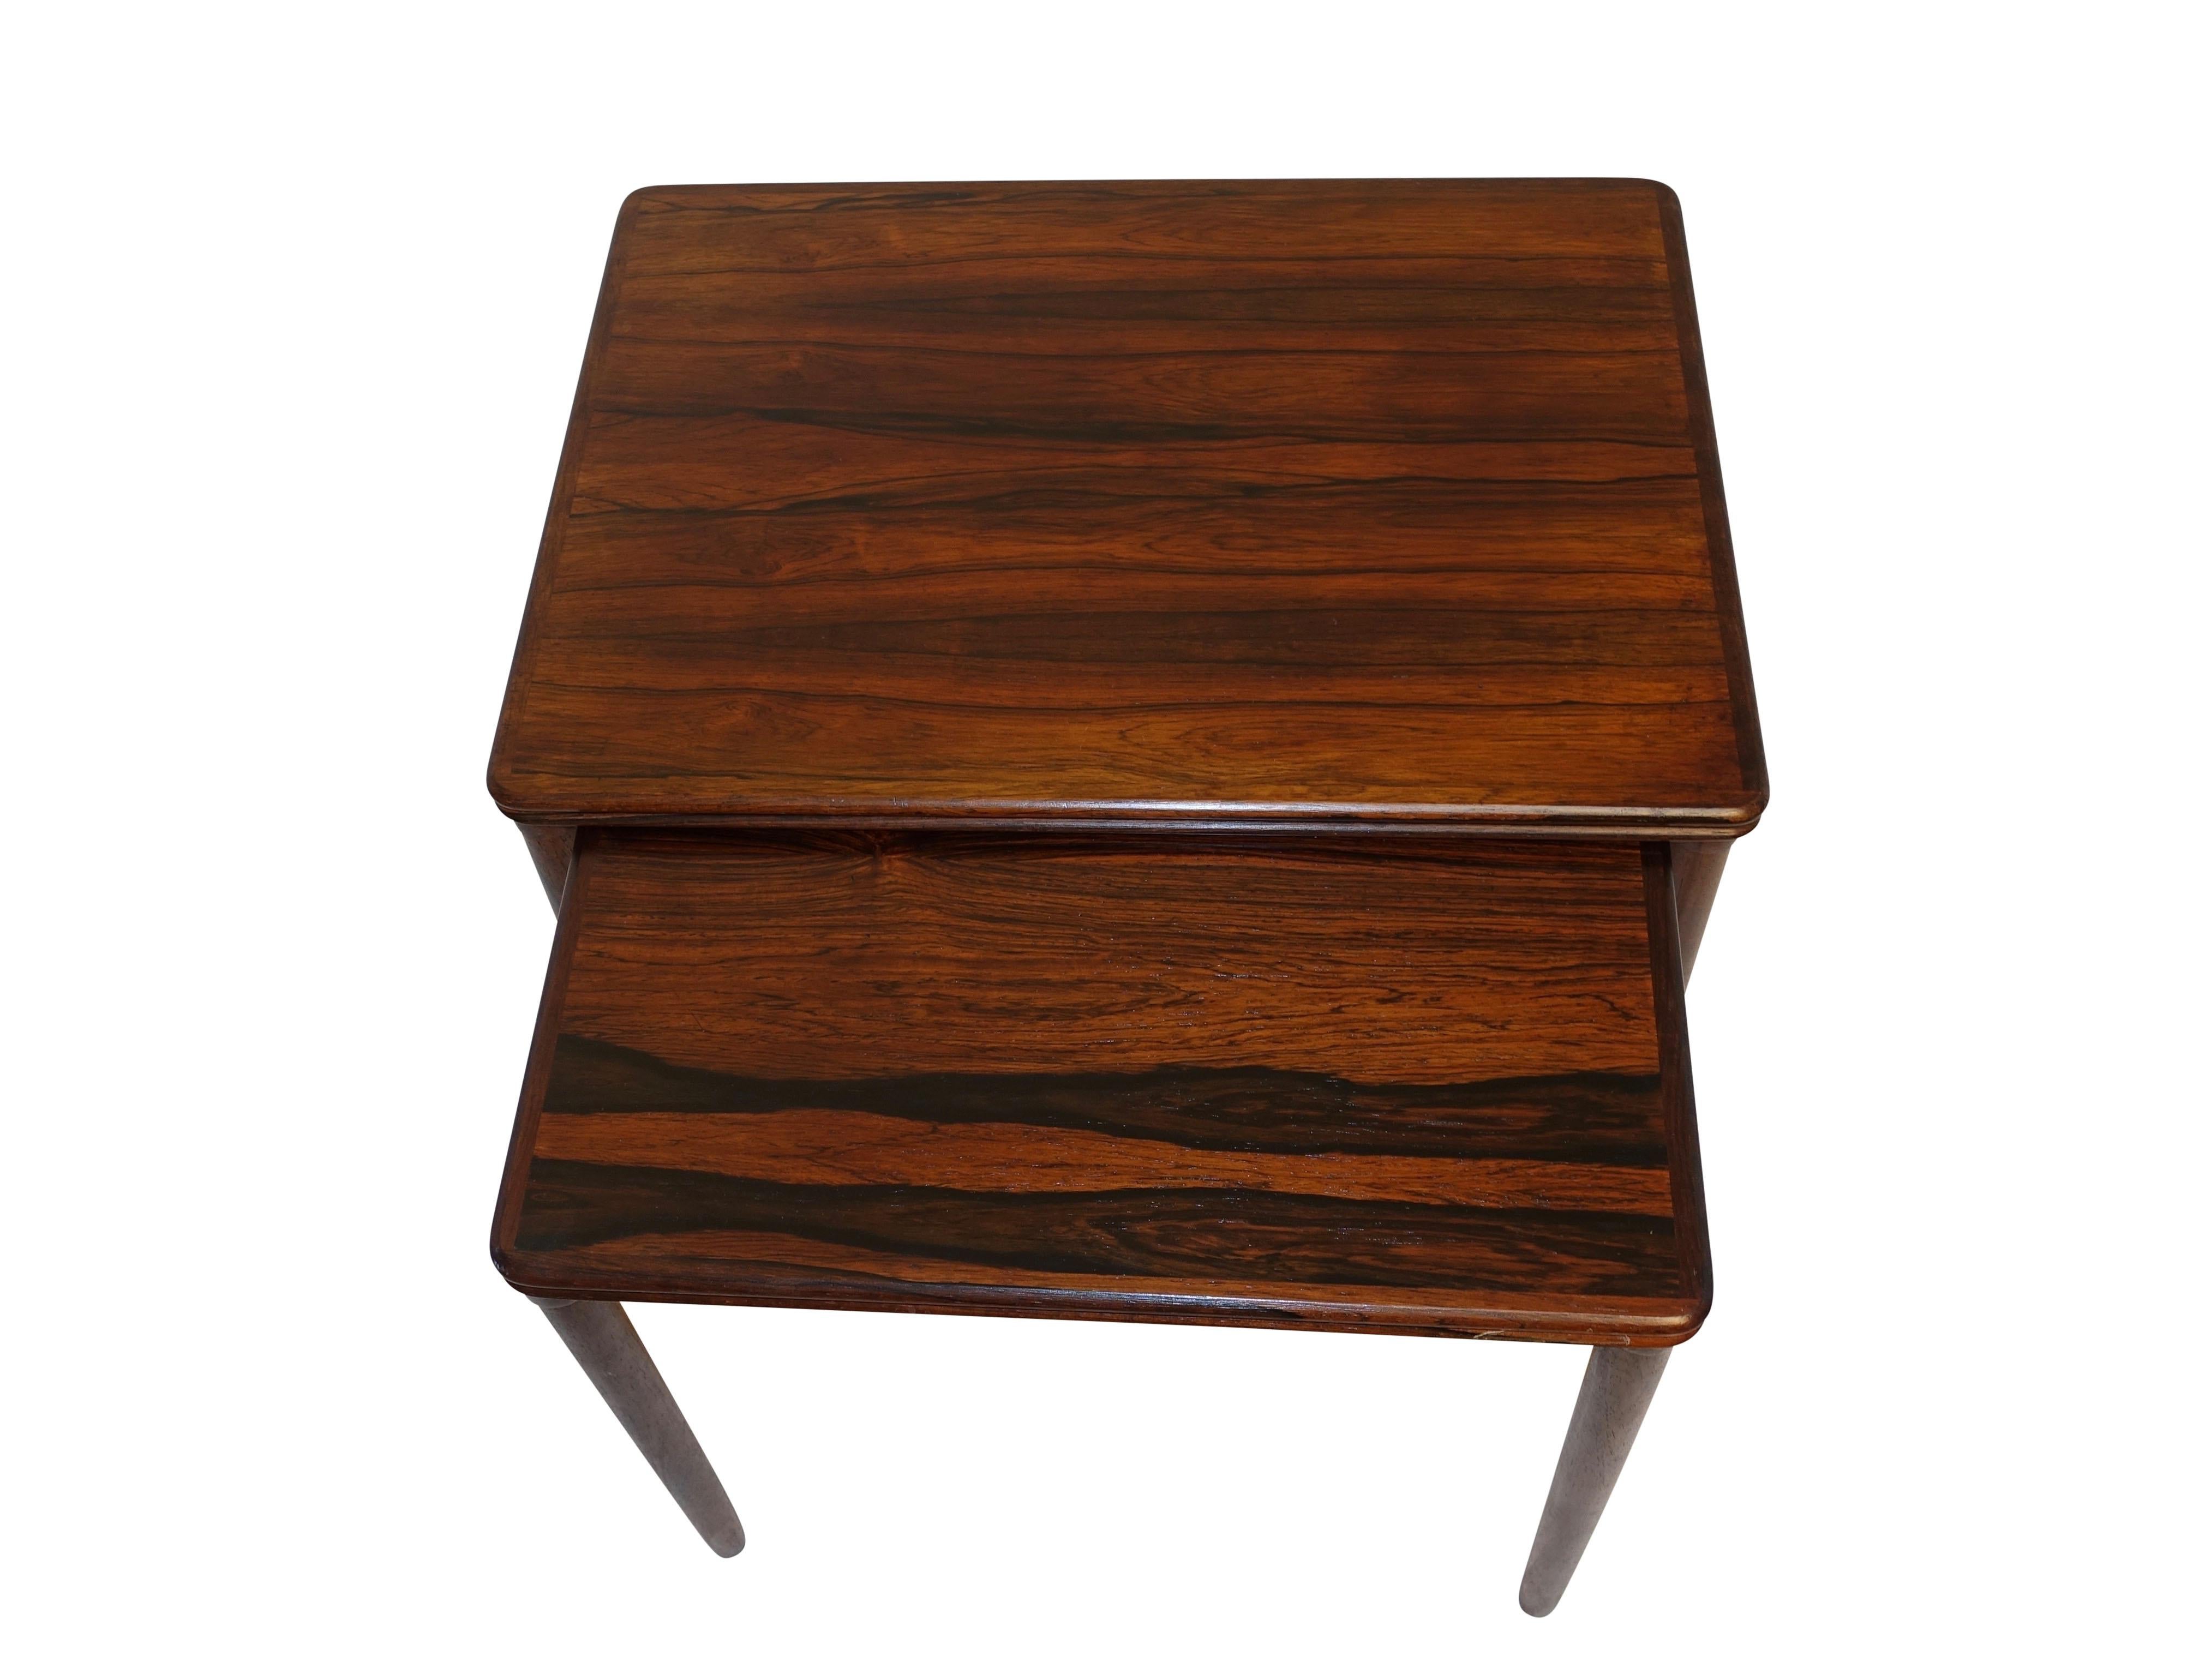 Two rosewood nesting tables with circular tapering legs. (Most likely originally a set of three). Mid-20th century, Danish modern, circa 1970.